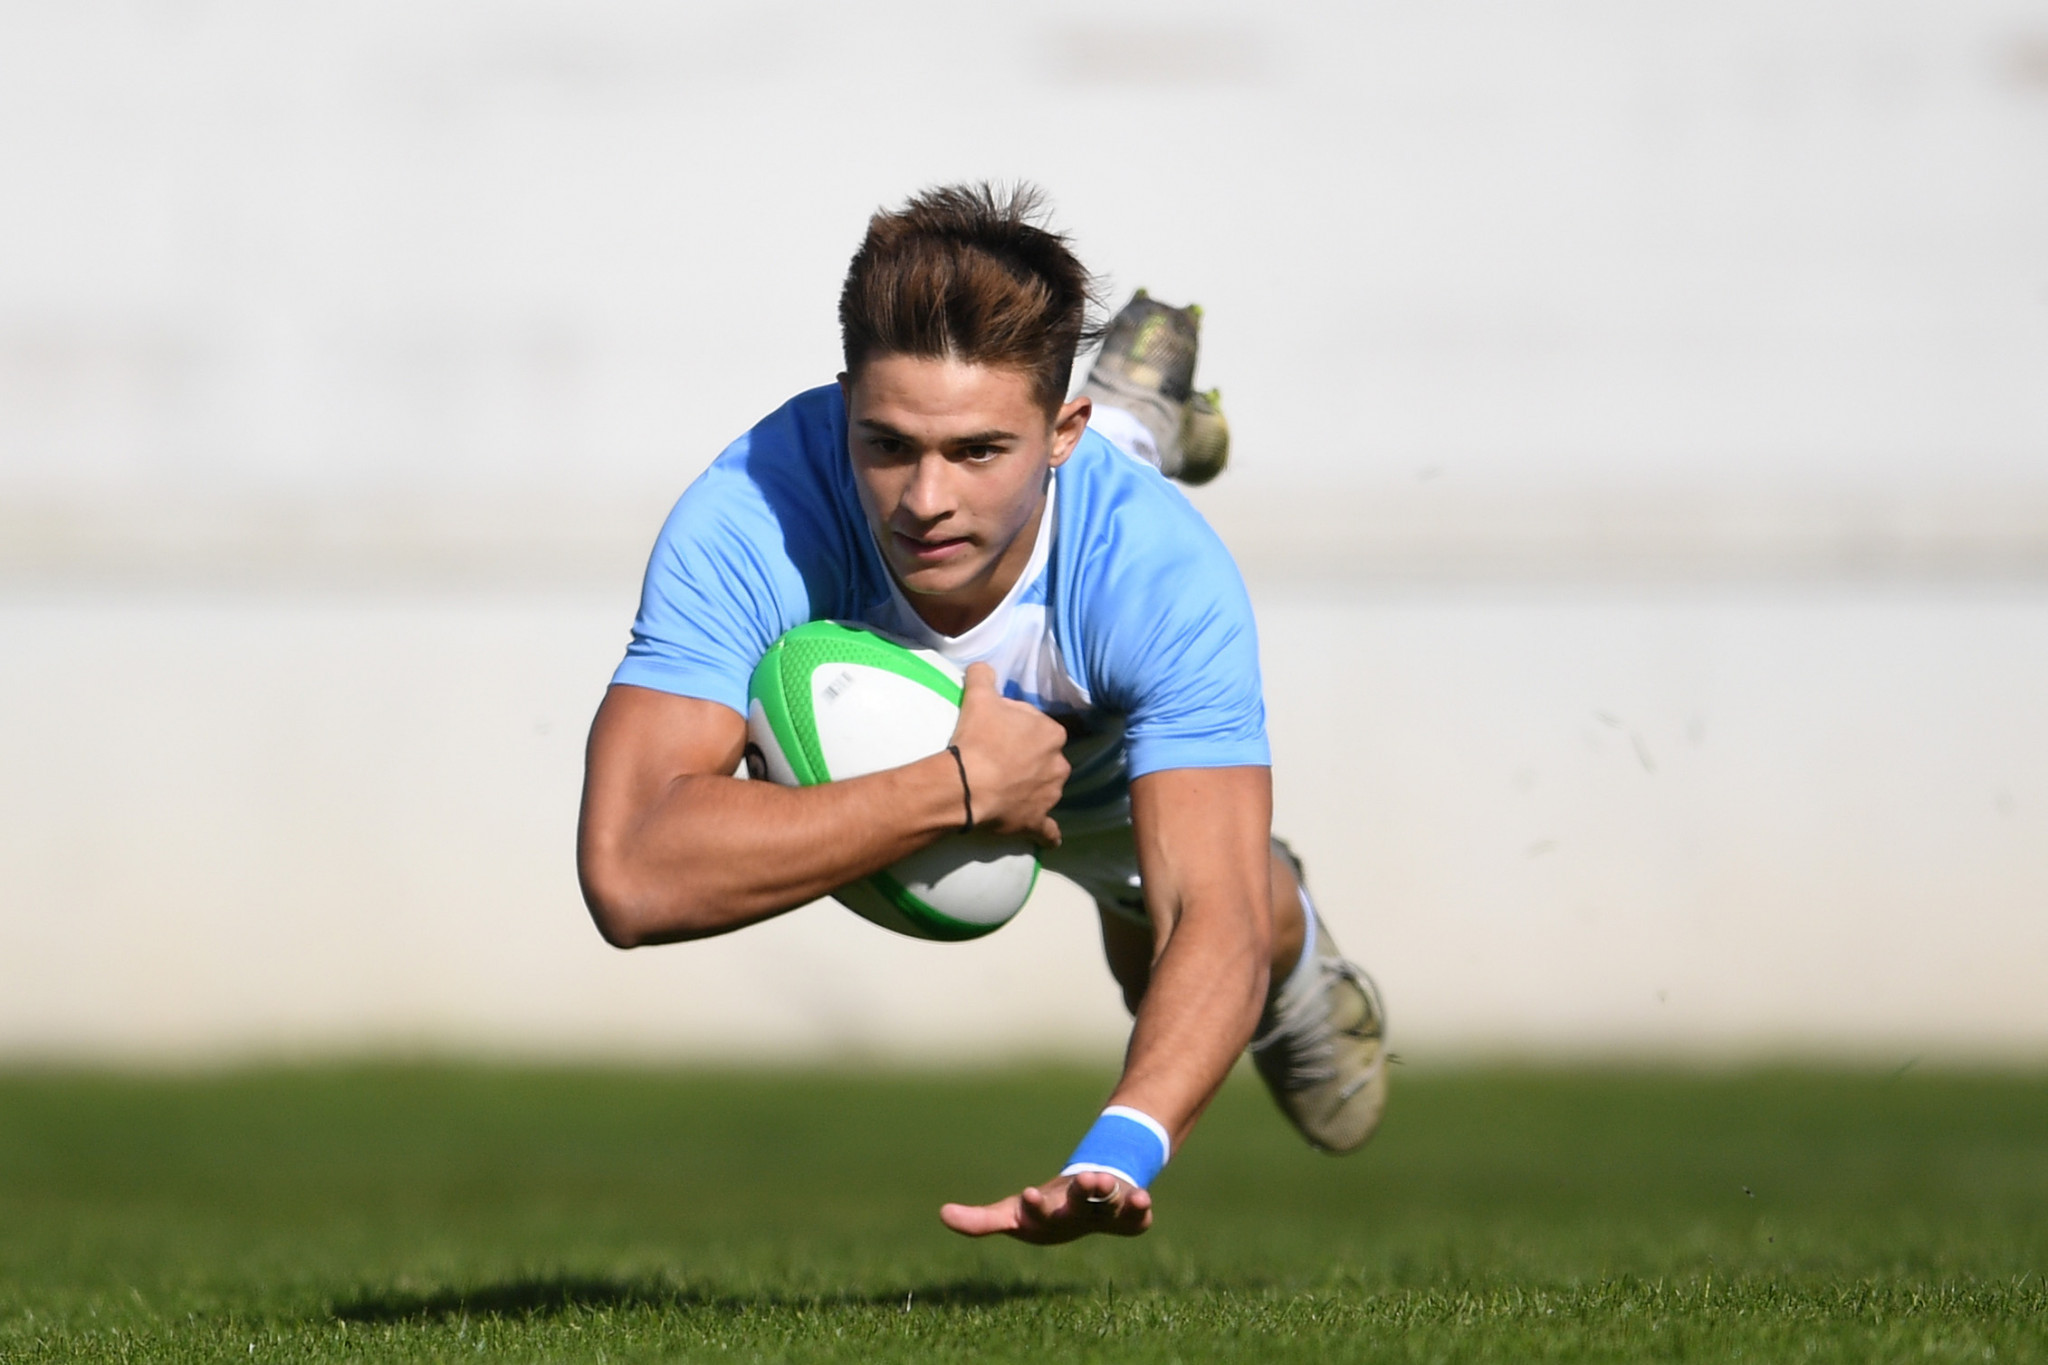 The 2021 World Rugby Men’s Sevens player of the year Marcos Moneta scored twice in Argentina's 29-5 quarter-final victory against Ireland ©Getty Images